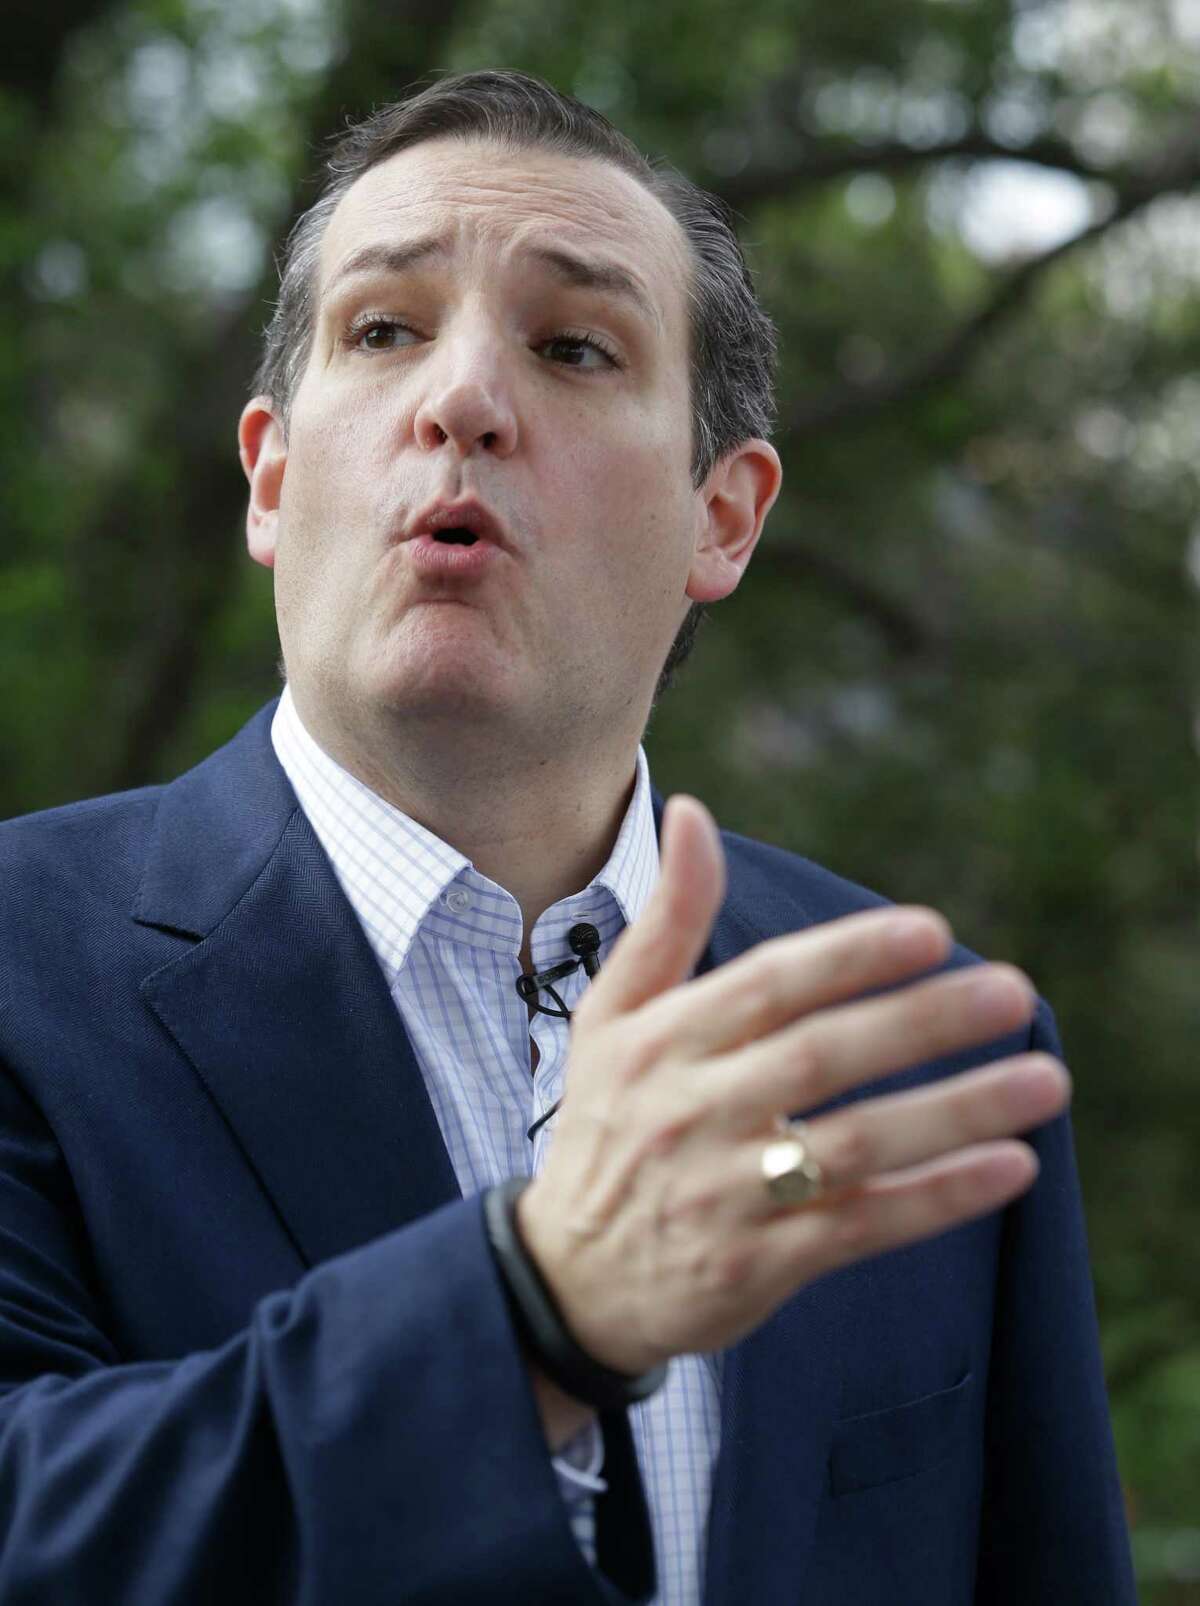 Sen. Ted Cruz, R-Texas "I understand a lot of the concerns raised by a lot of citizens about Jade Helm. It’s a question I’m getting a lot, and I think part of the reason is we have seen, for six years, a federal government disrespecting the liberty of the citizens. And that produces fear, when you see a federal government that is attacking our free speech rights, or religious liberty rights, or Second Amendment rights, that produces distrust.” Source: Bloomberg